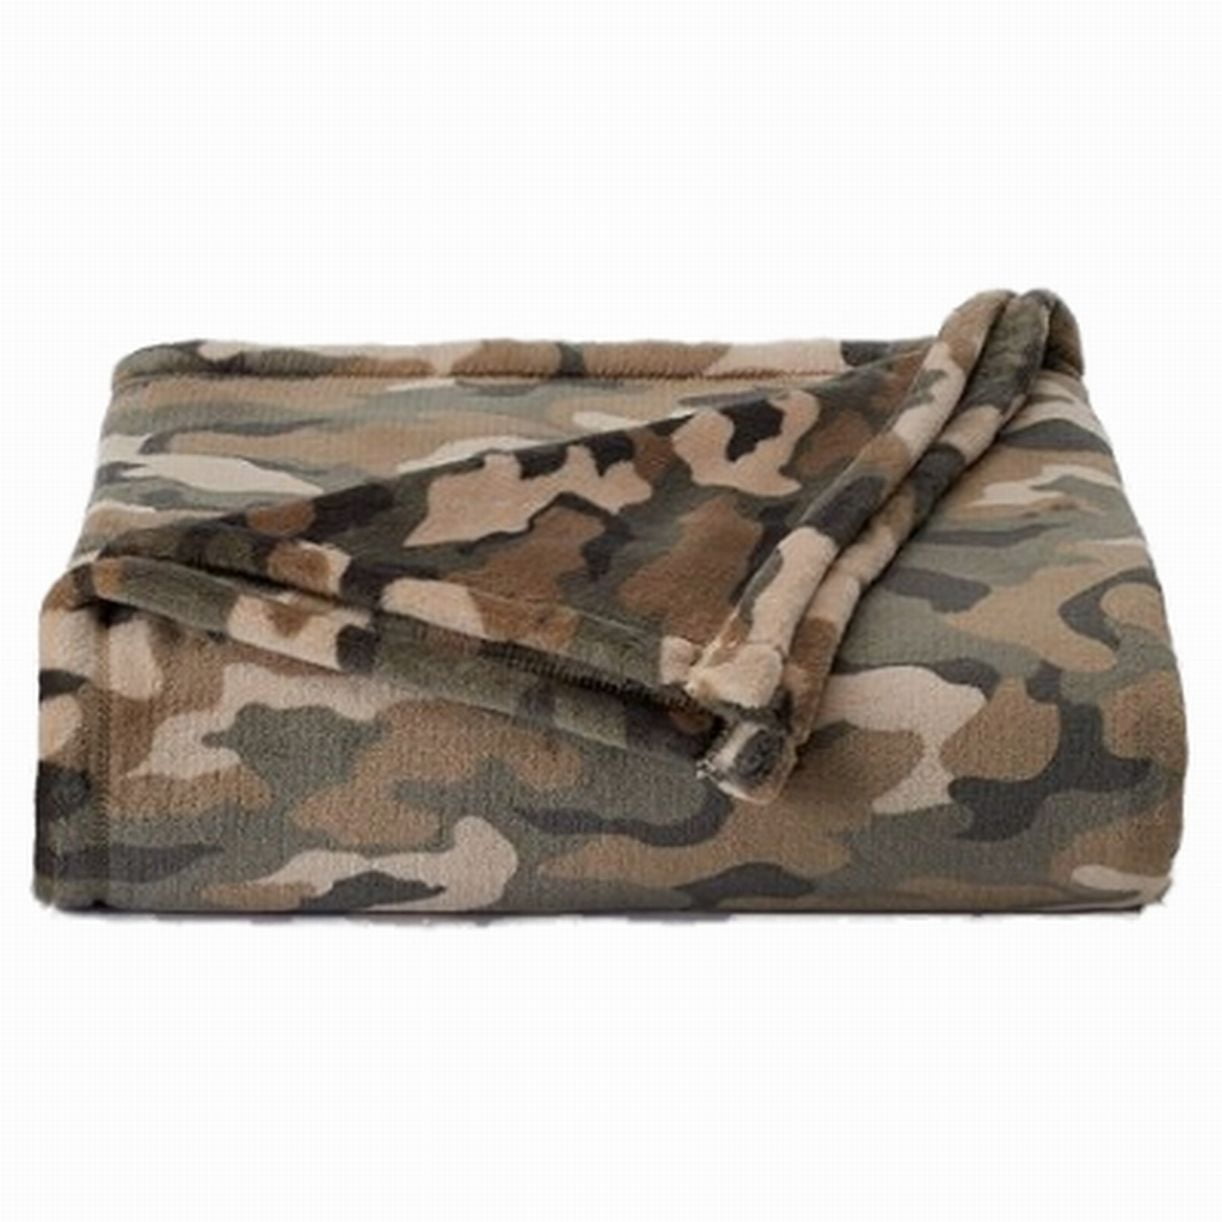 Grey Camouflage 50 x 60 Inch Super Soft Royal Plush Blanket with Snack Pavilion Phone Or Remote Holder Pocket in The Corner Stay Strong 